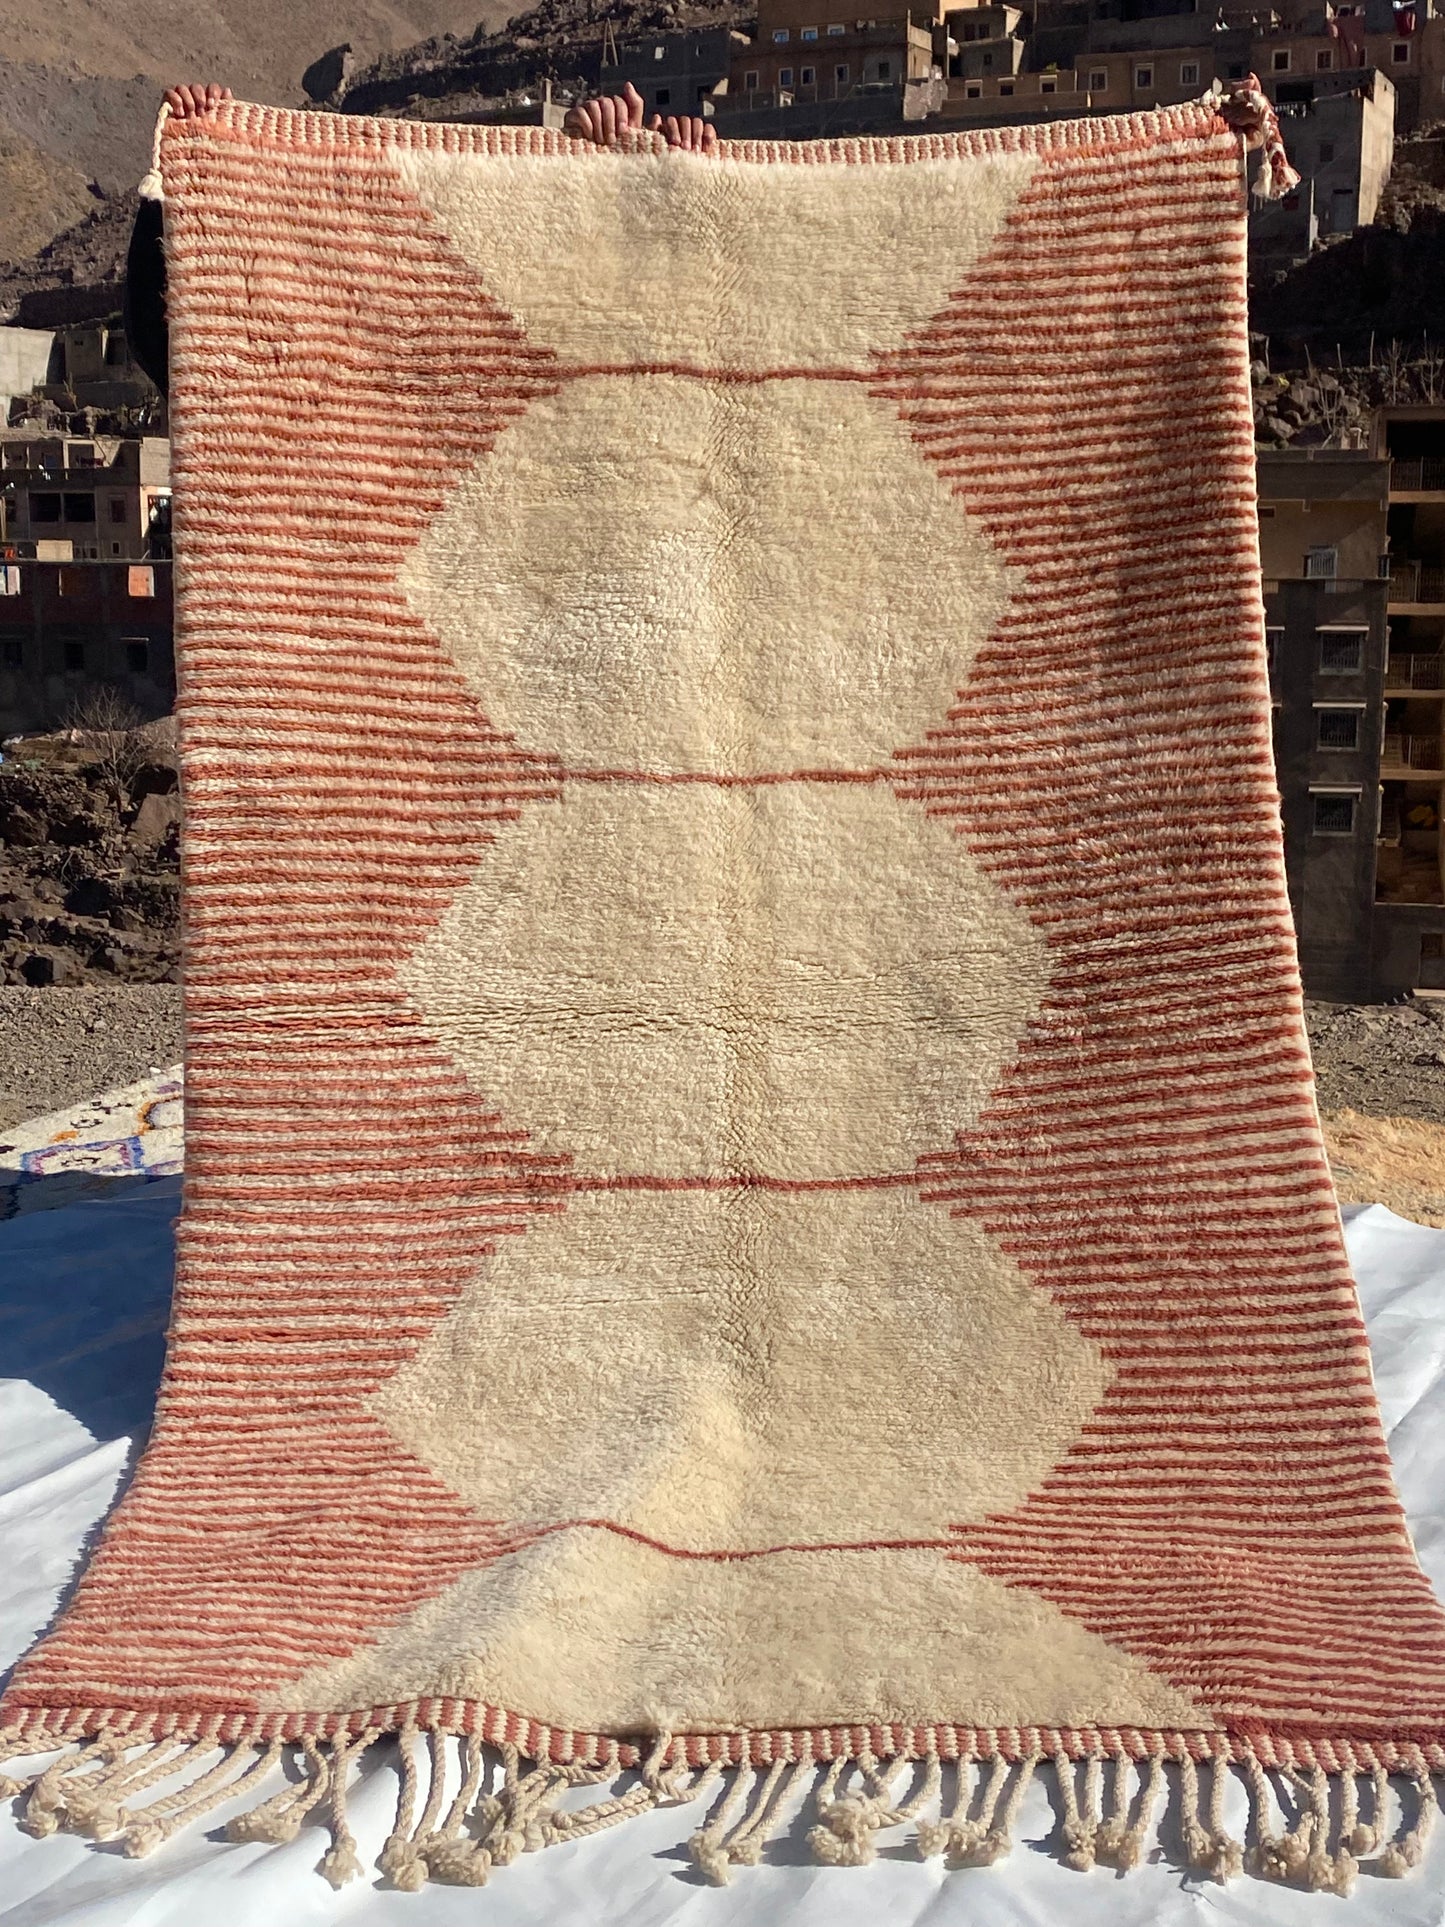 Beni Ourain rugs originate from the Atlas Mountains of Morocco and are characterized by their distinctive, neutral-toned, and geometric designs. These handwoven rugs often feature a plush pile and are made by the Berber tribes,  size is 255x150 cm